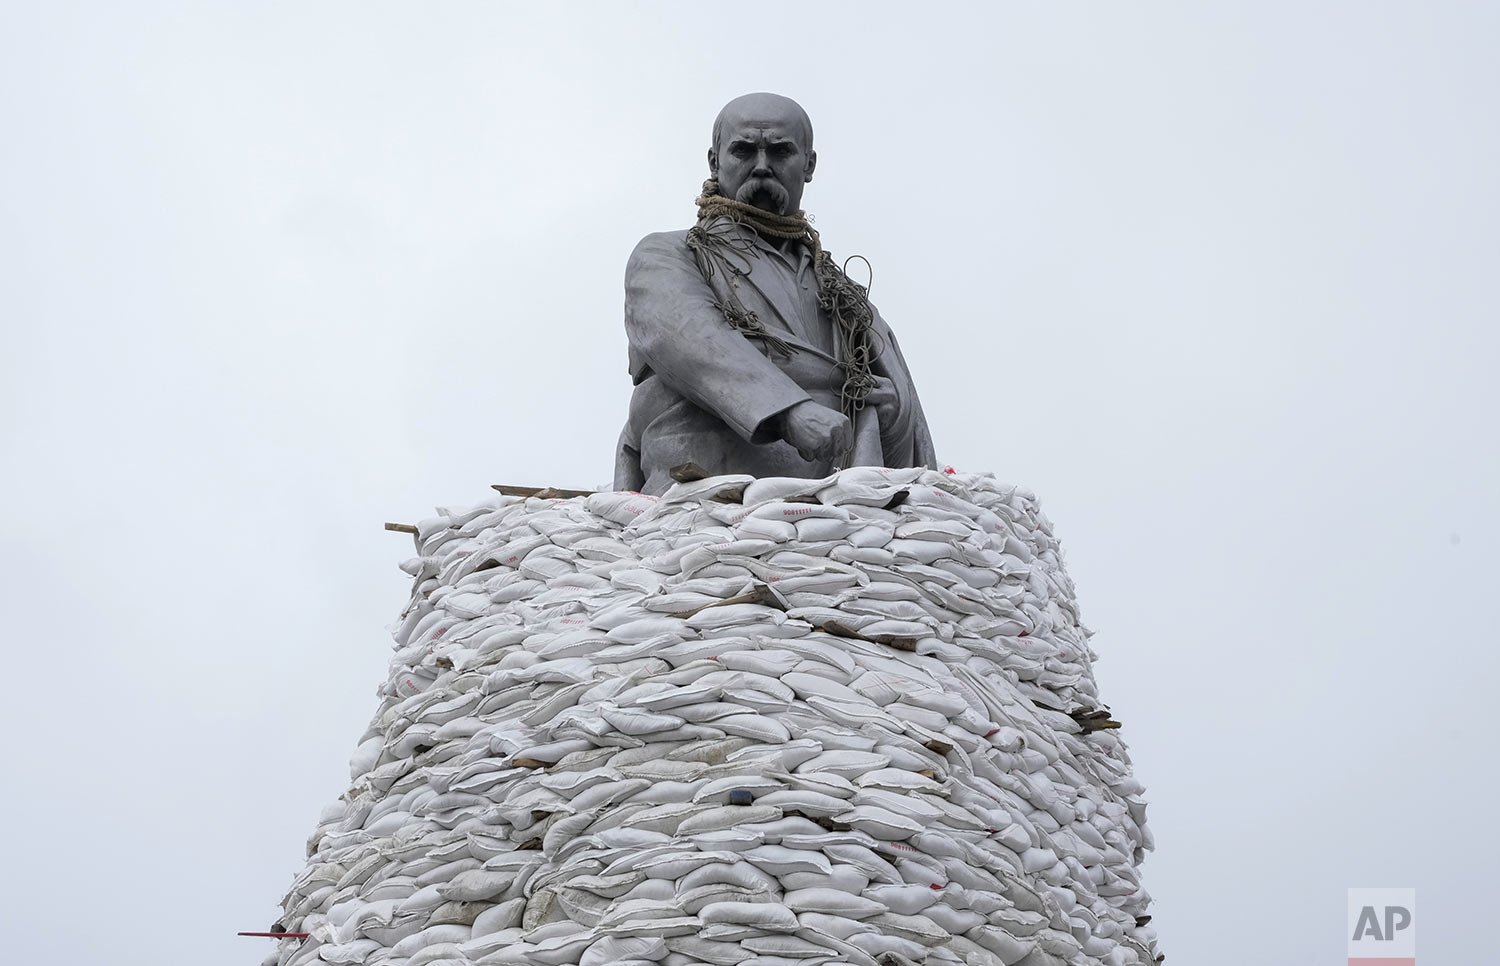  A monument of Taras Shevchenko, a famous Ukrainian poet and a national symbol, is covered with bags to protect it from the Russian shelling in Kharkiv, Ukraine, Sunday, March 27, 2022. The bronze 16 meter high monument was opened in 1935, survived W